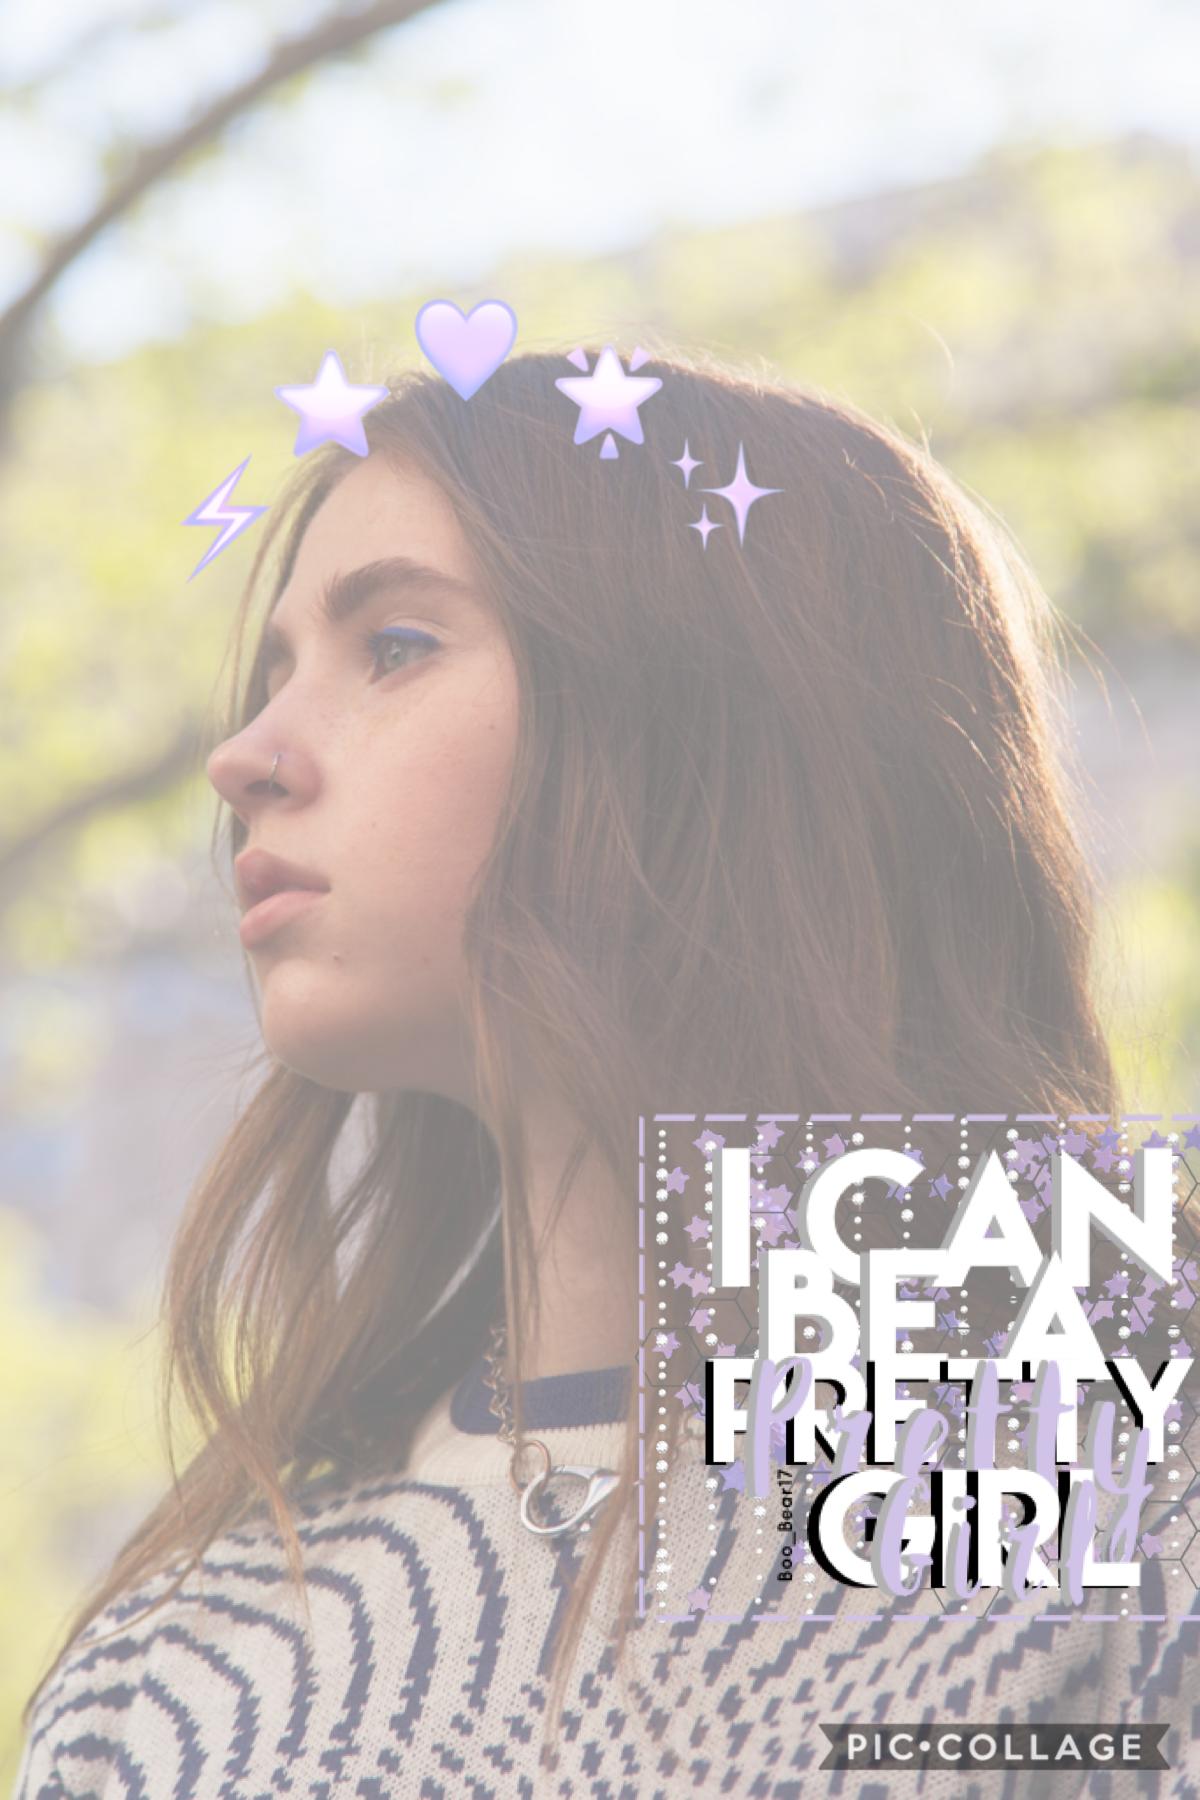 💜I can be a pretty girl💜
•Clairo is one of my new favorite artists, hence this edit
•also I’ve been praying for Posty lately, he doesn’t seem alright and it sucks to see that
•song rec: Addicted by Saving Abel